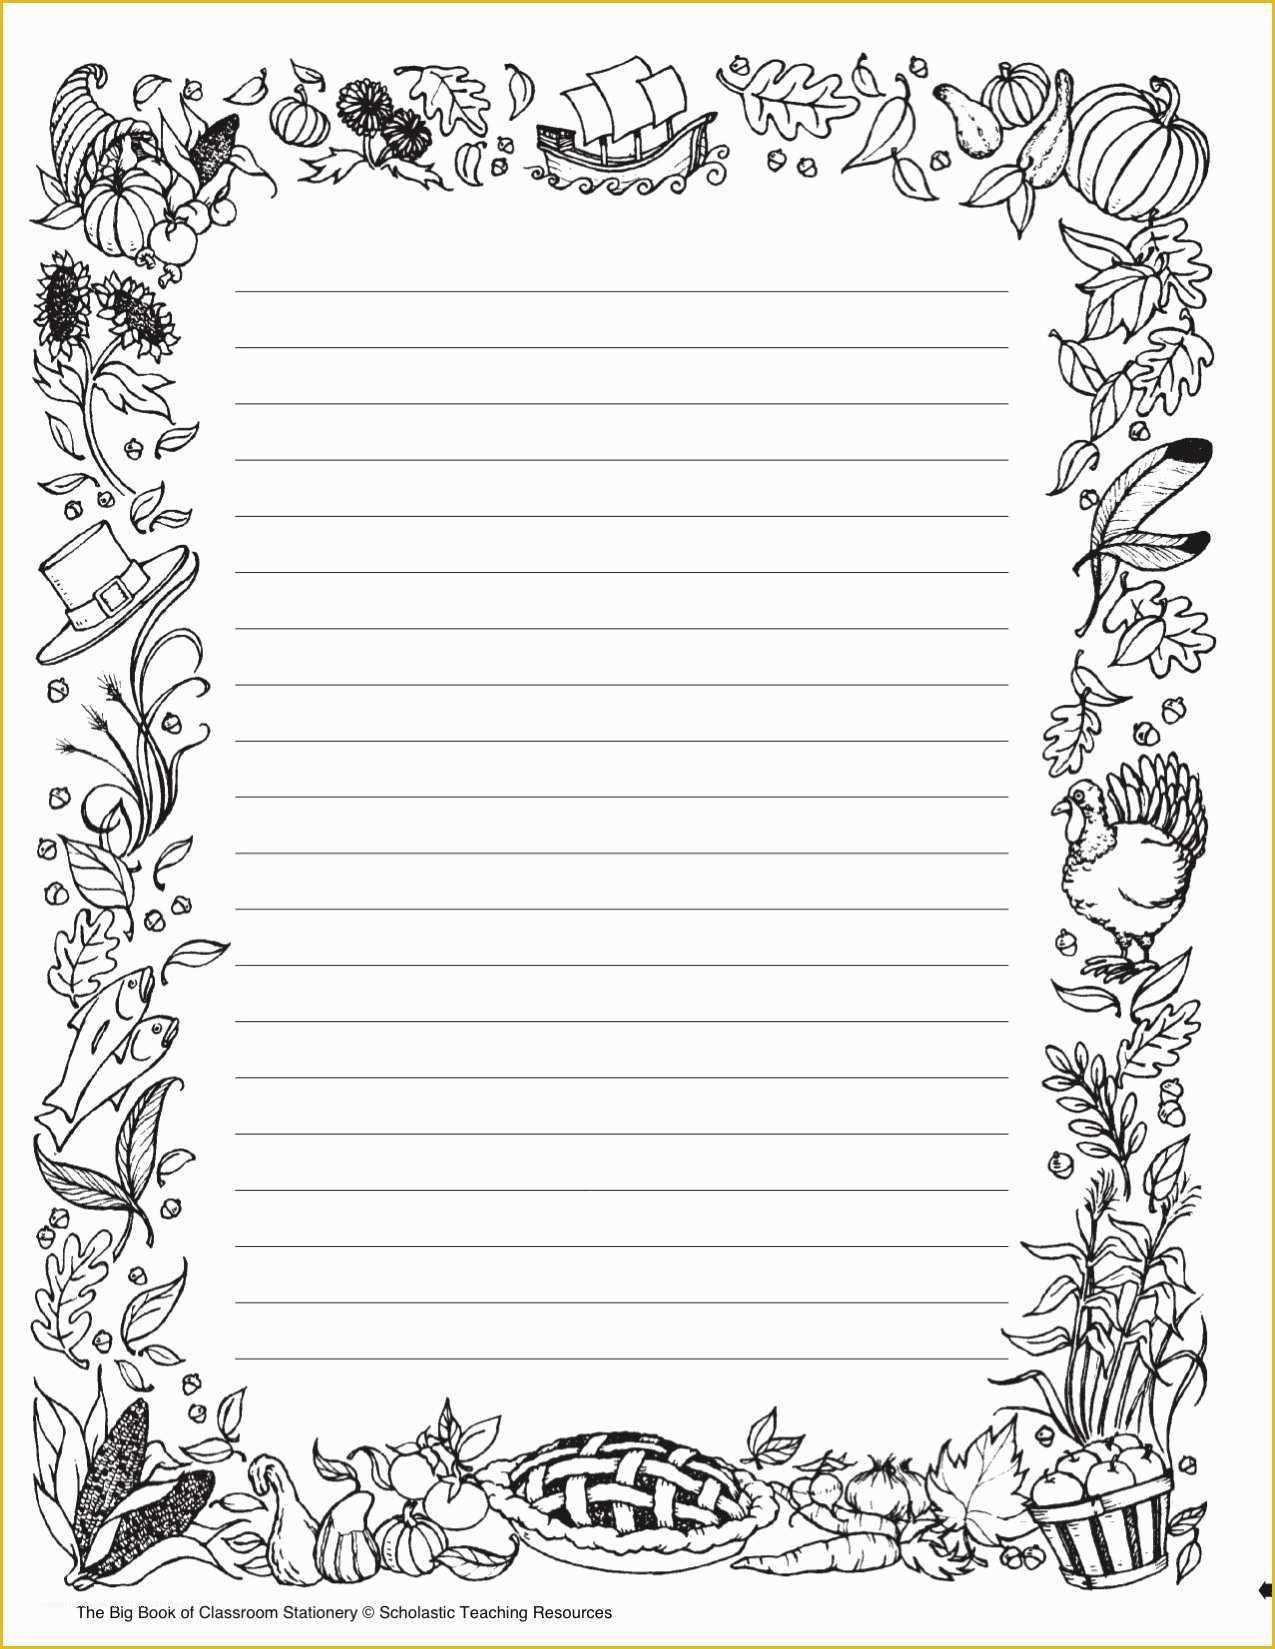 free-printable-stationery-templates-of-black-and-white-printable